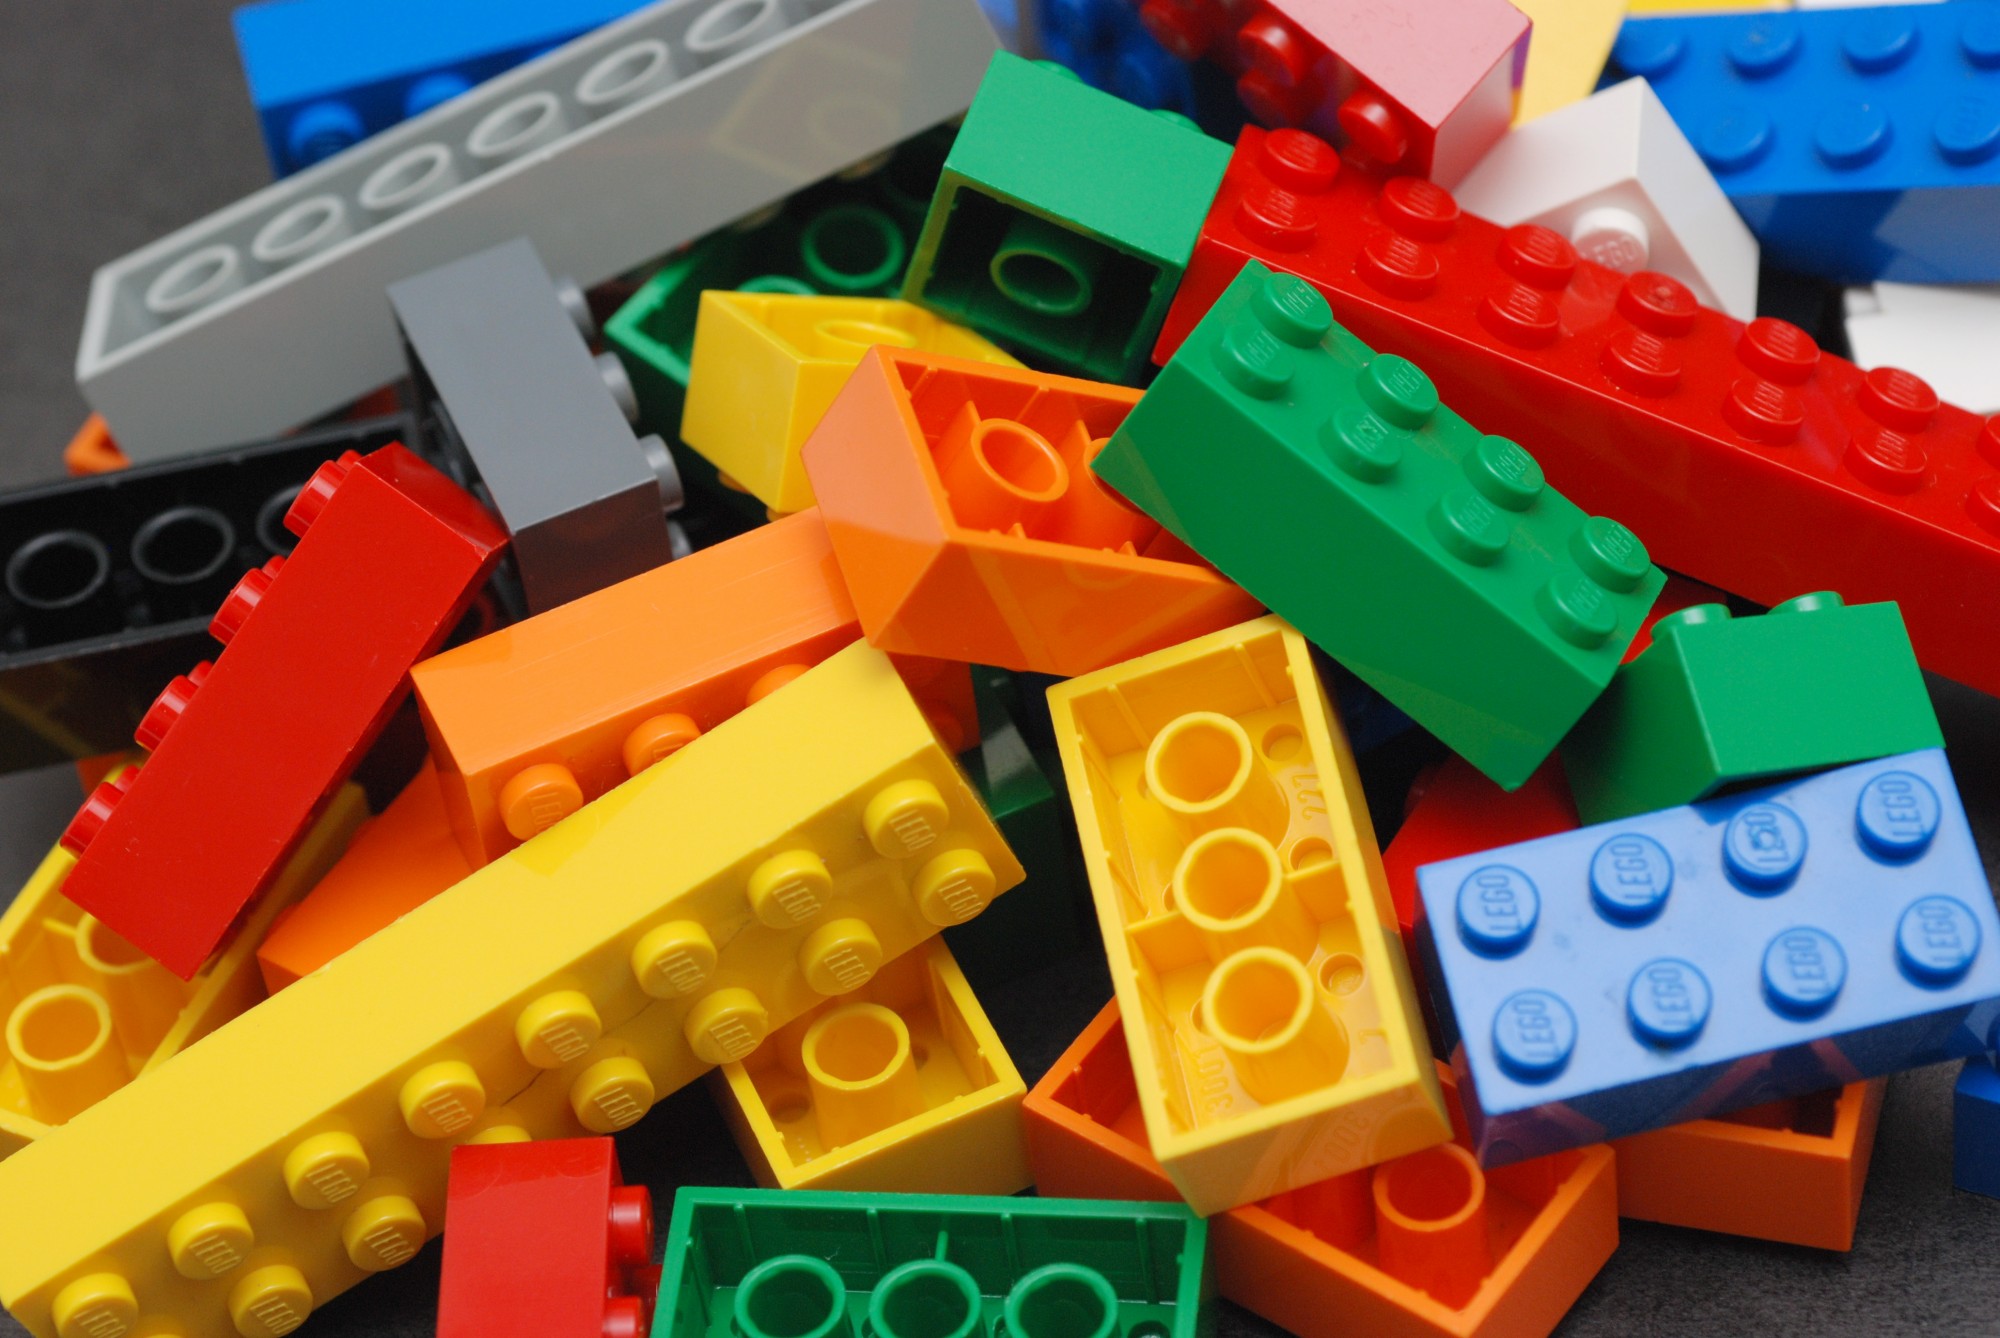 LEGO is ditching plastic in favor of sustainable materials